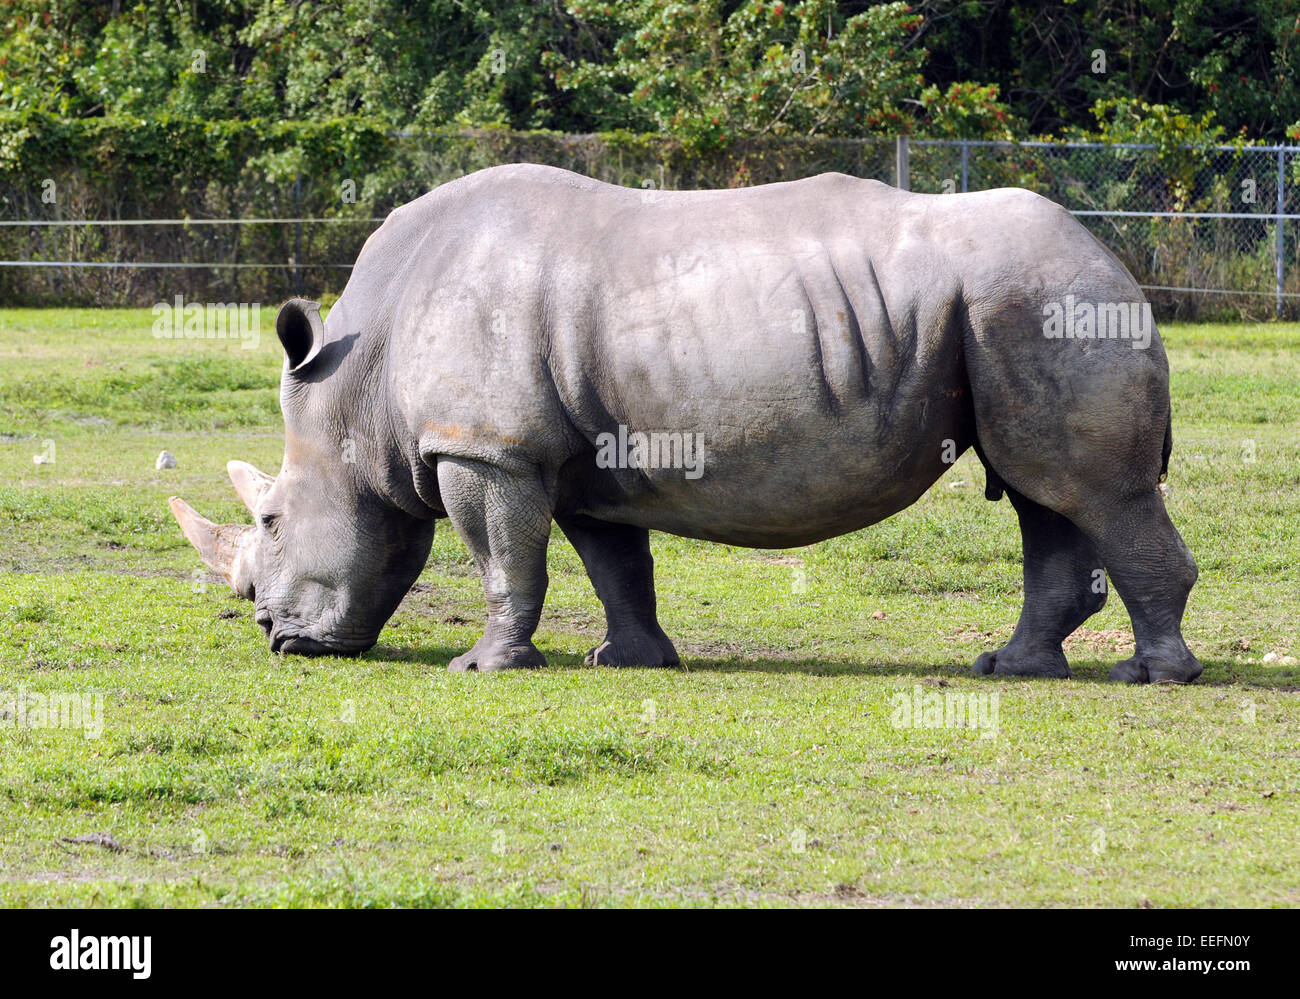 Adult rhinoceros, side view, isolated on white background Stock Photo -  Alamy